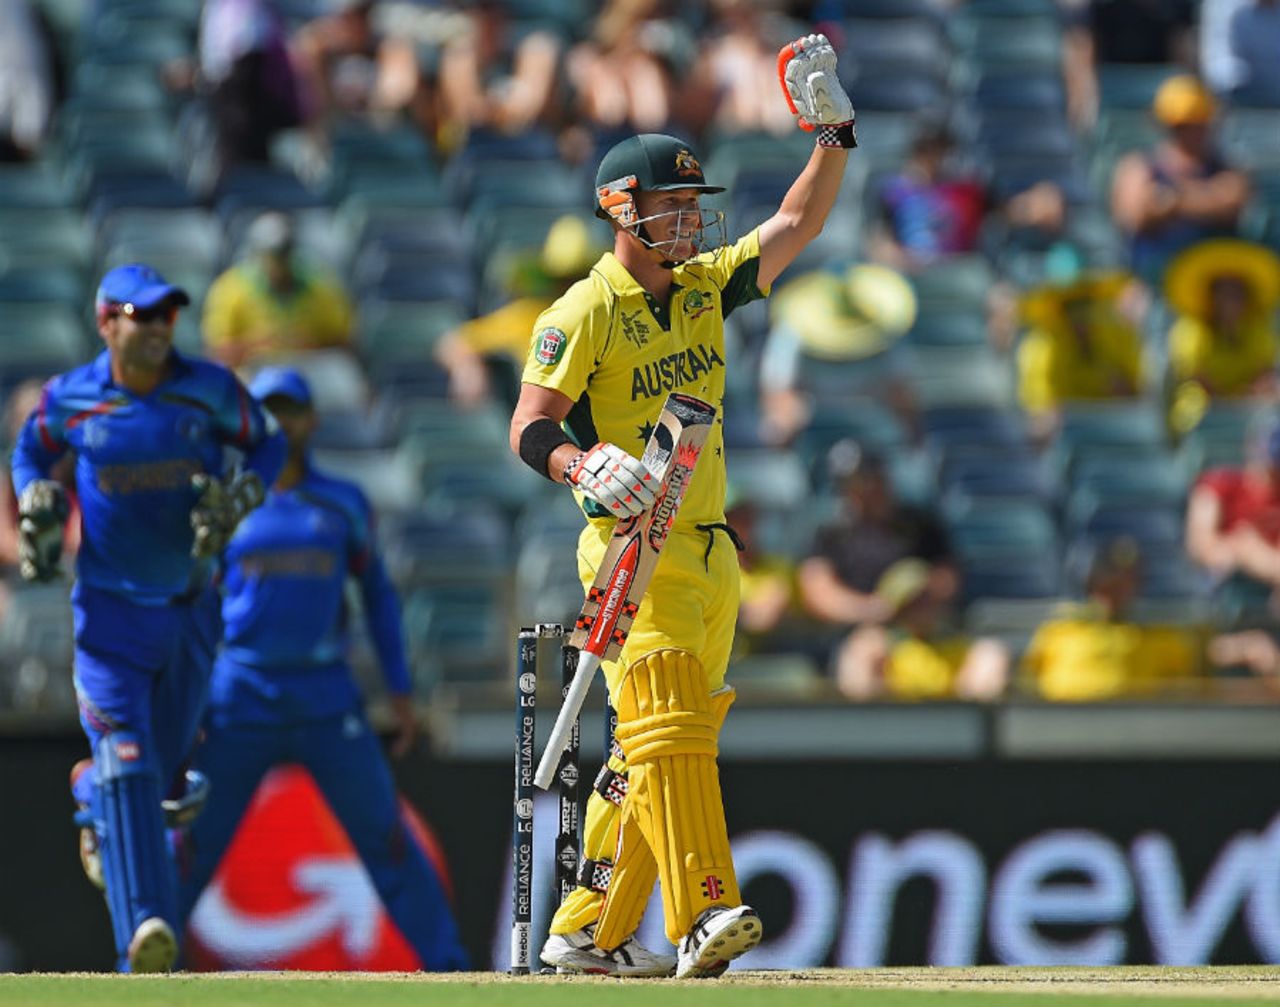 David Warner signals to the dressing room after completing his fifty, Australia v Afghanistan, World Cup 2015, Group A, Perth, March 4, 2015